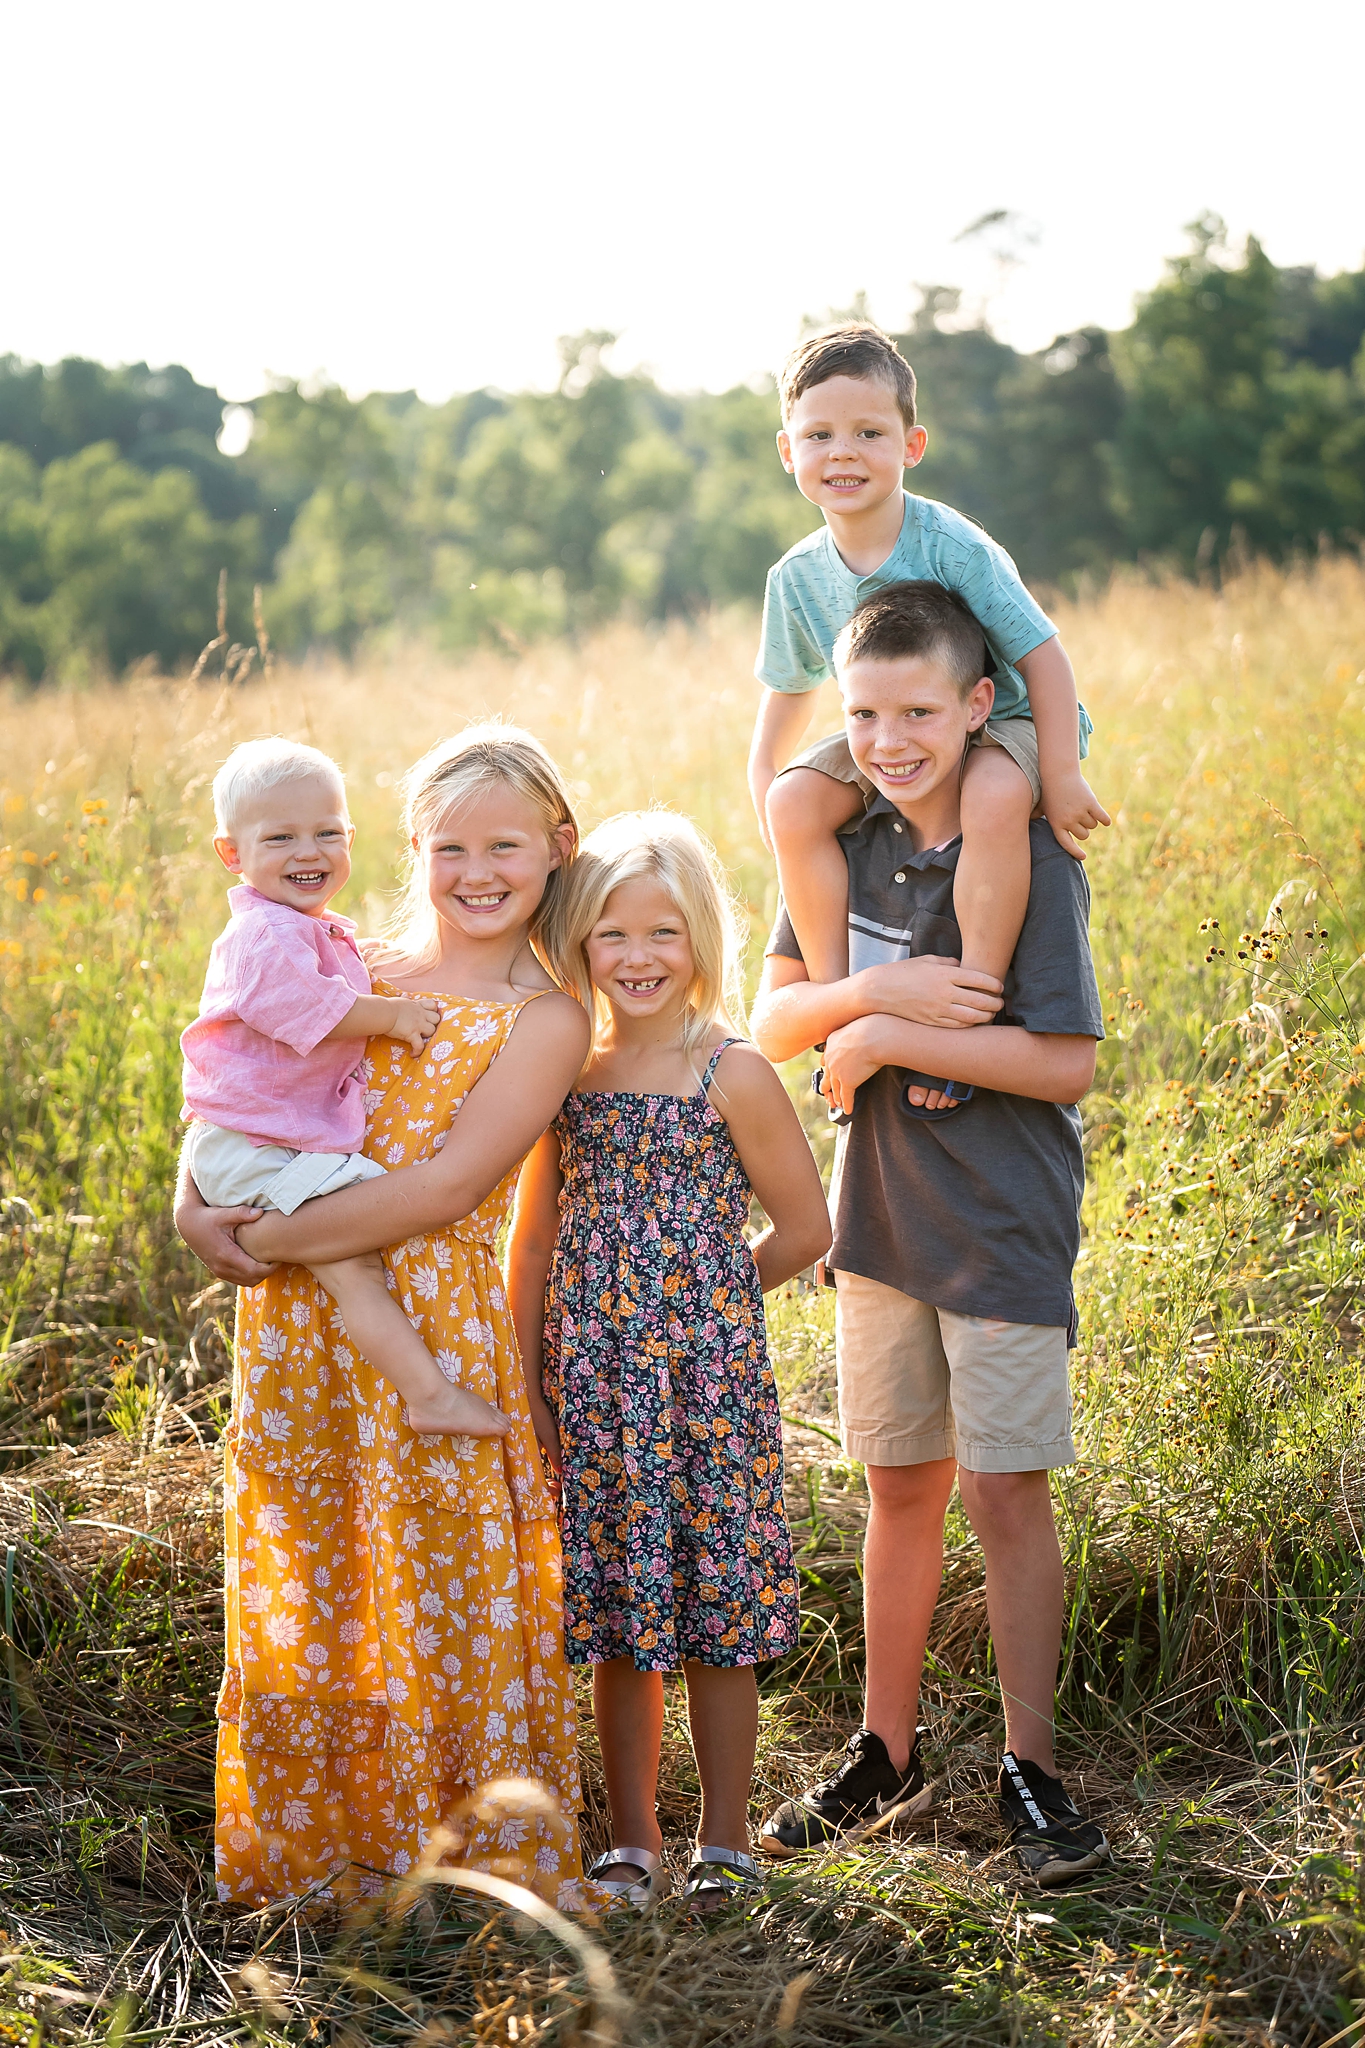 Family Photography Poses and Ideas